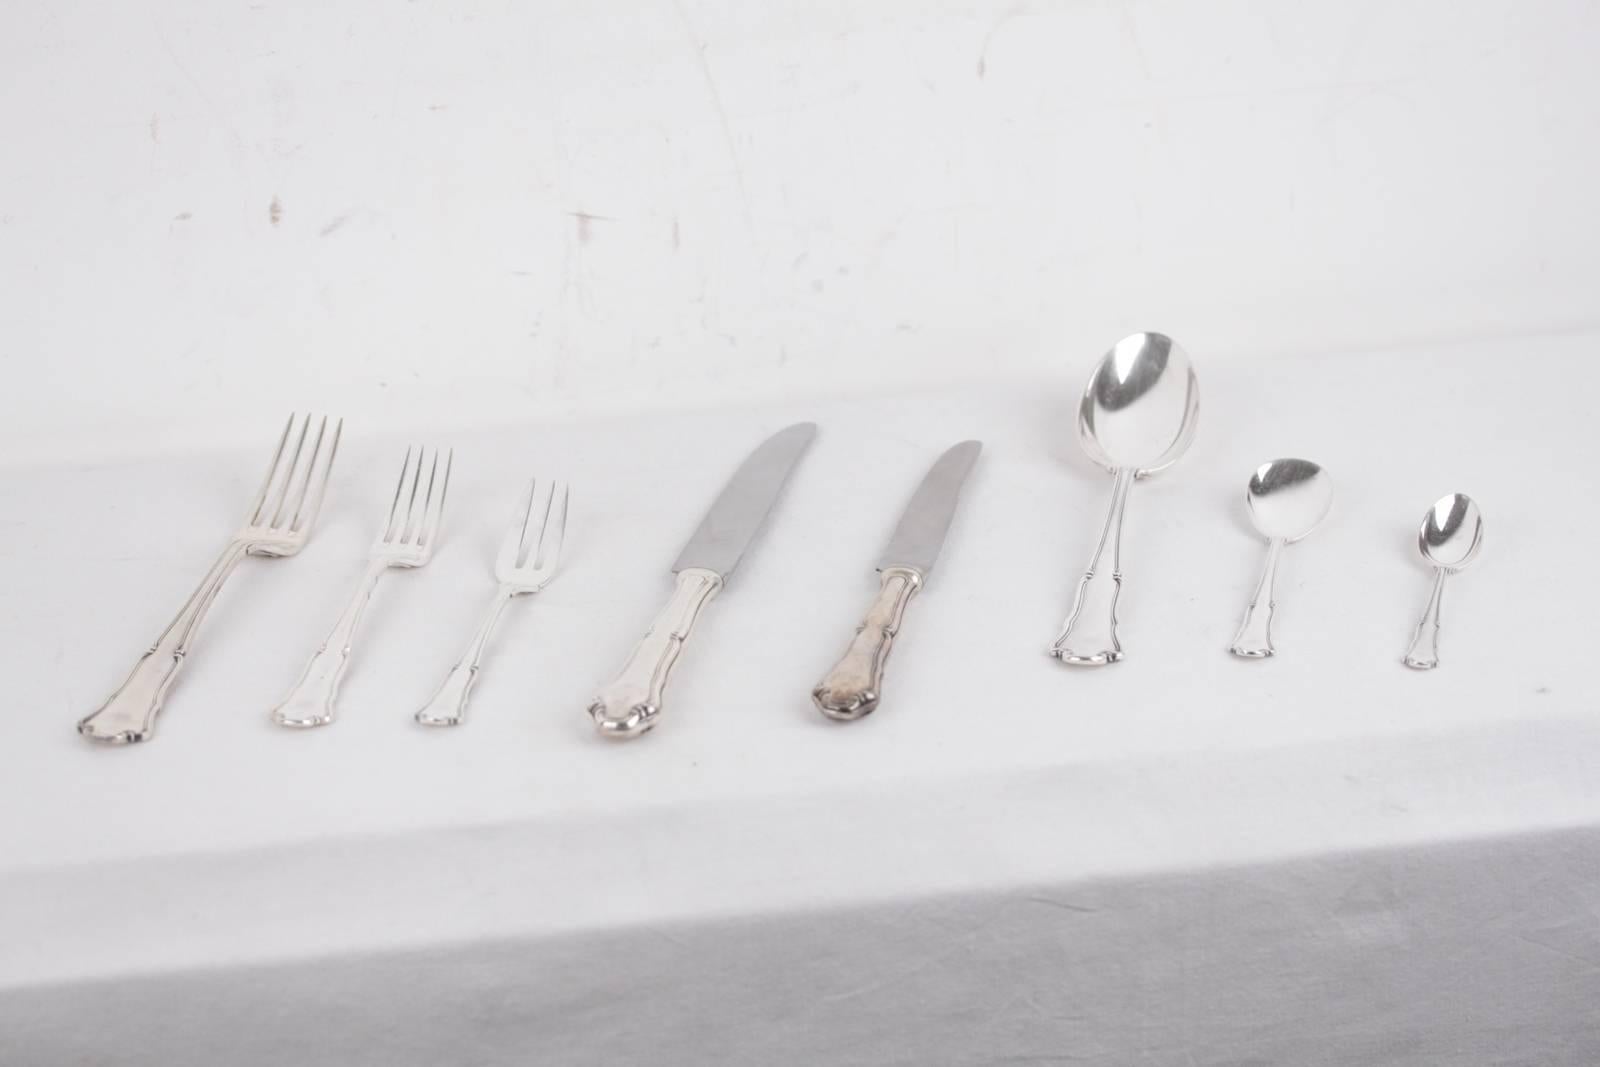  - Vintage 1970 flatware Italian Cutlery set, in 800 Silver.

- Signed "SCORTECCI" Roma

- Set composition:

12 big forks, 12 big knives, 6 big spoons, 6 fruit forks, 6 fruit knives, 6 dessert forks, 6 small dessert spoons, 6